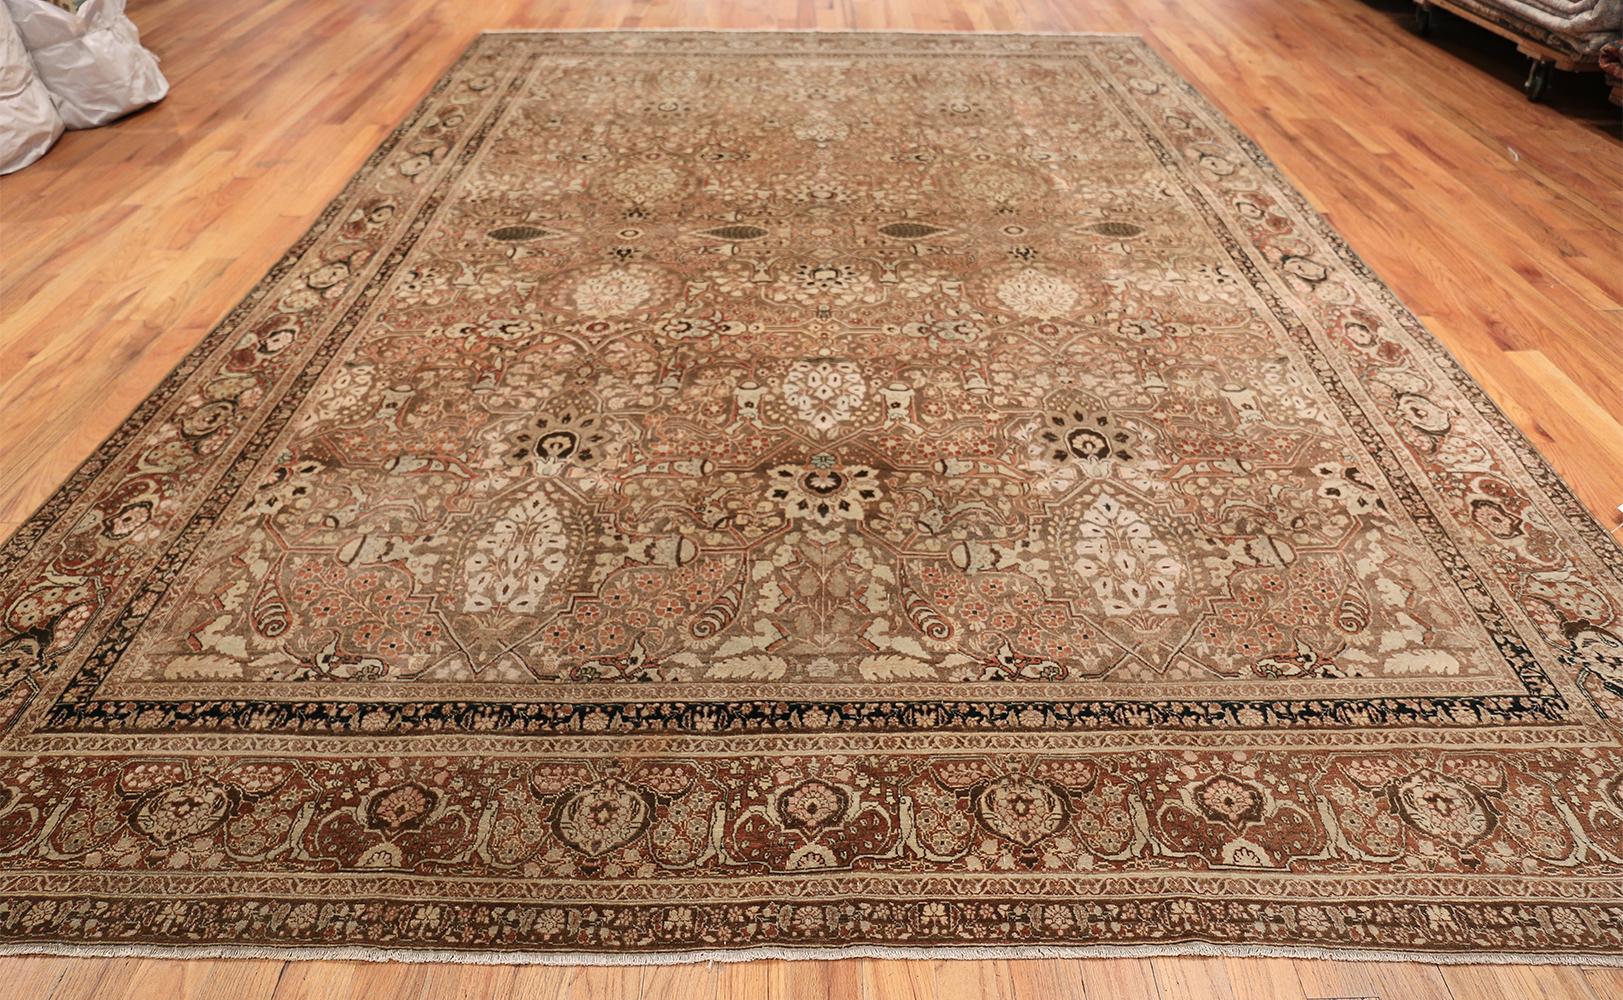 Antique Persian Tabriz rug, Country of origin: Persia, circa date: 1900 – A complex ‘Mina Khani’ pattern of vines and palmettes unfolds in all-over symmetry across the field of this supremely elegant antique Tabriz. A mesh of delicate vines entirely